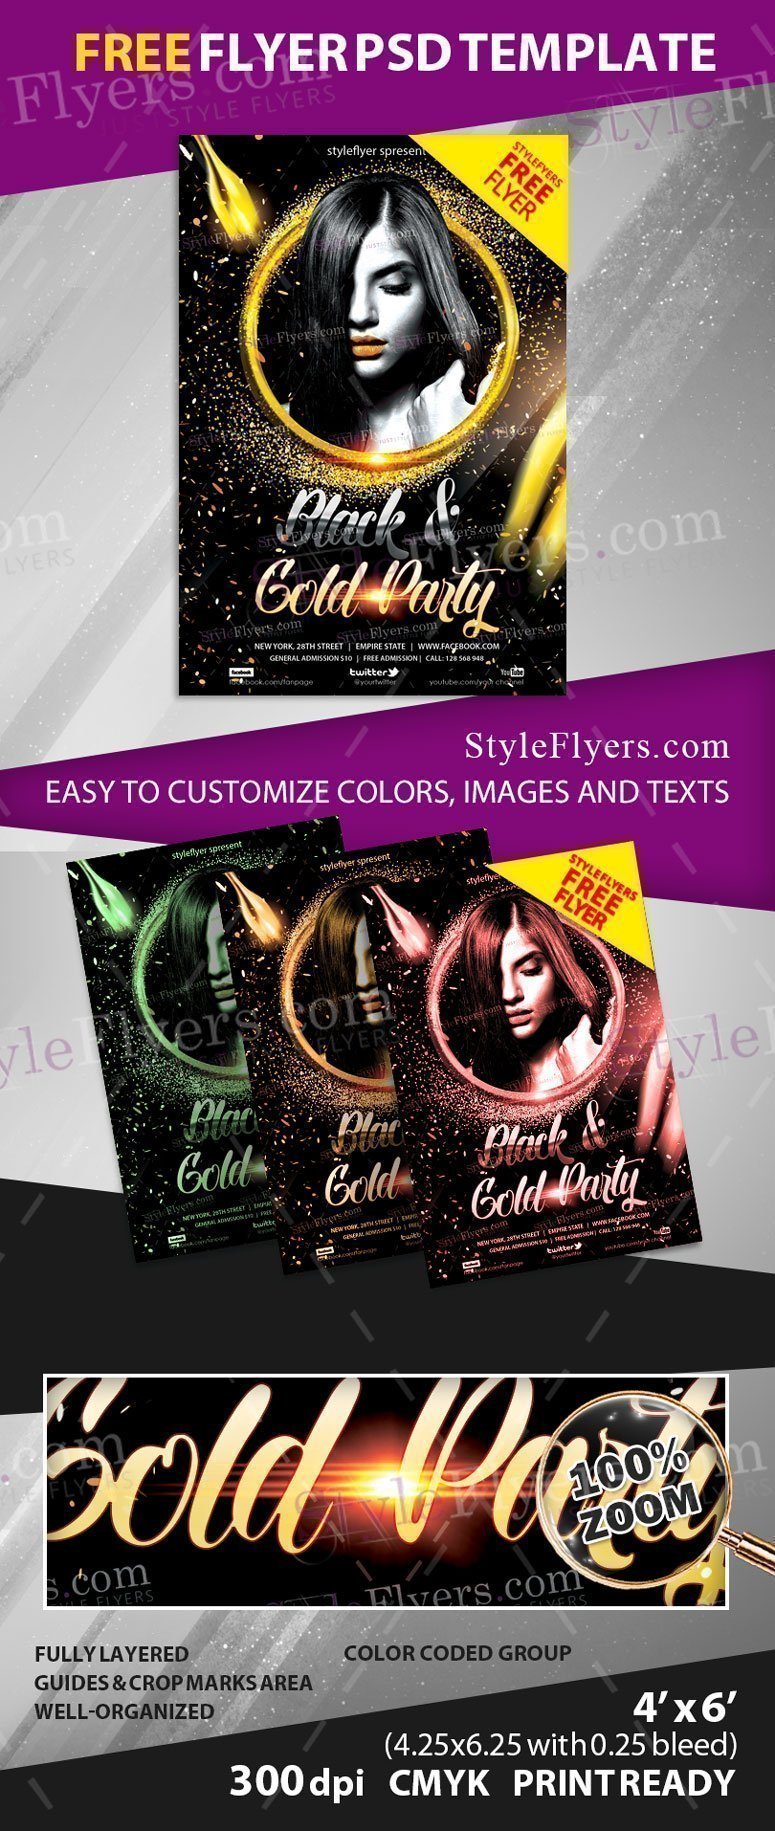 Black & Gold Night FREE PSD Flyer Template Free Download #26296 -  Styleflyers